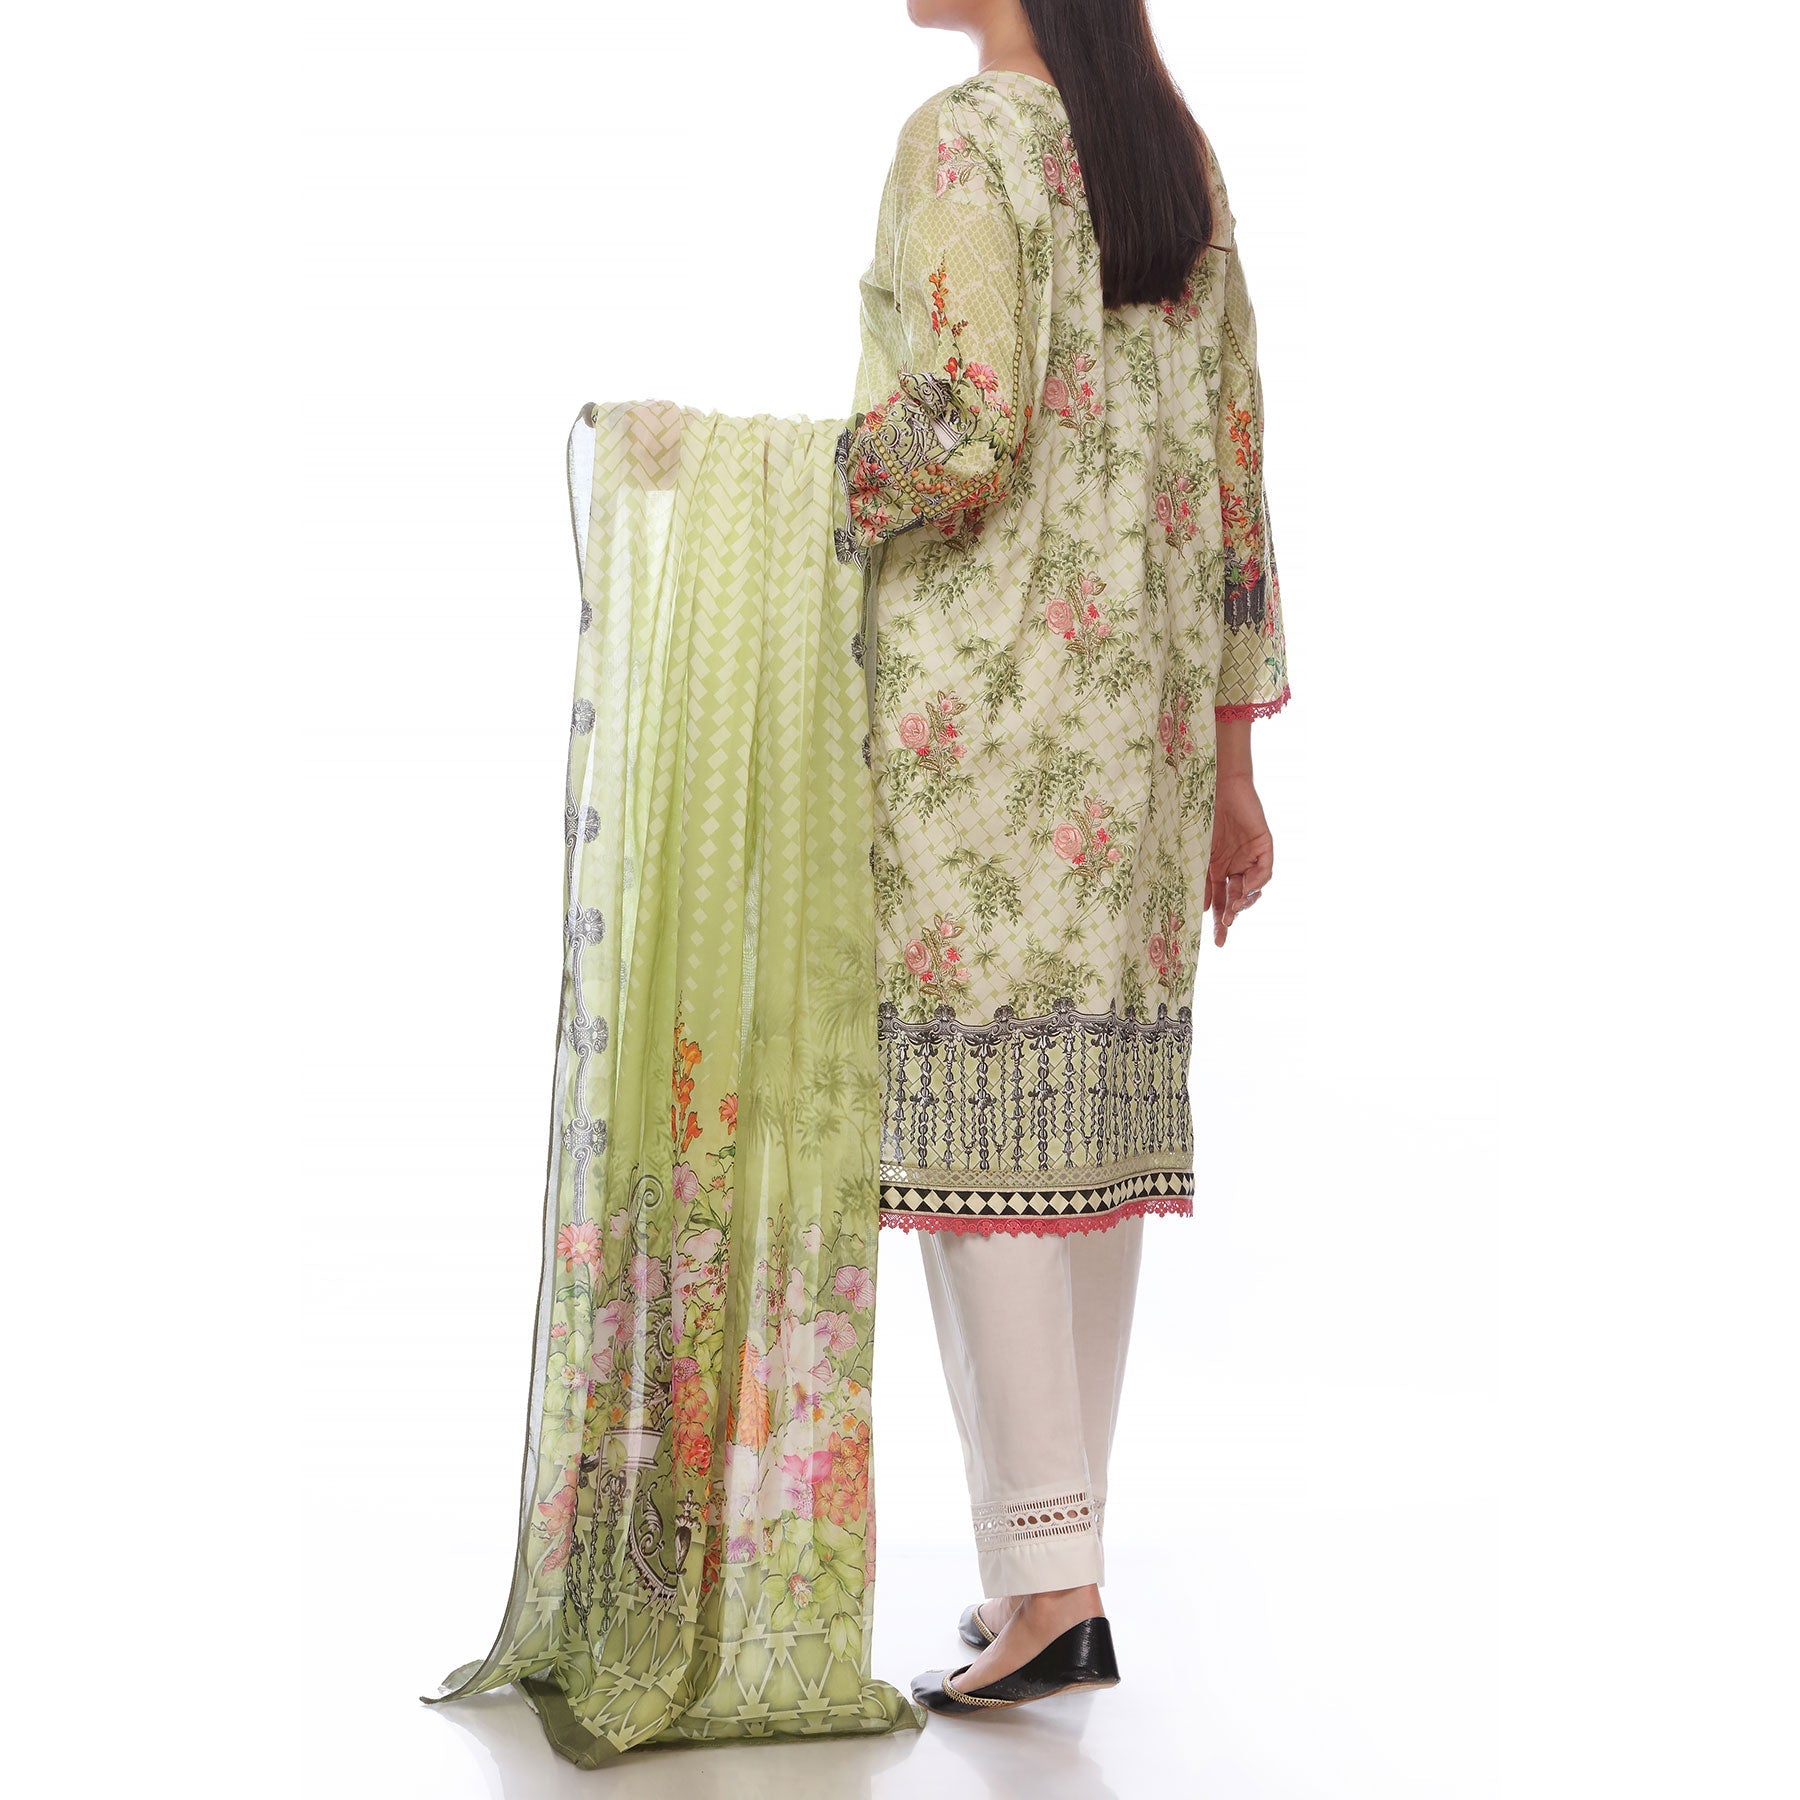 Digital Printed Lawn Shirt With Embroiderd Motifs Front
Digital Printed Lawn Duppata